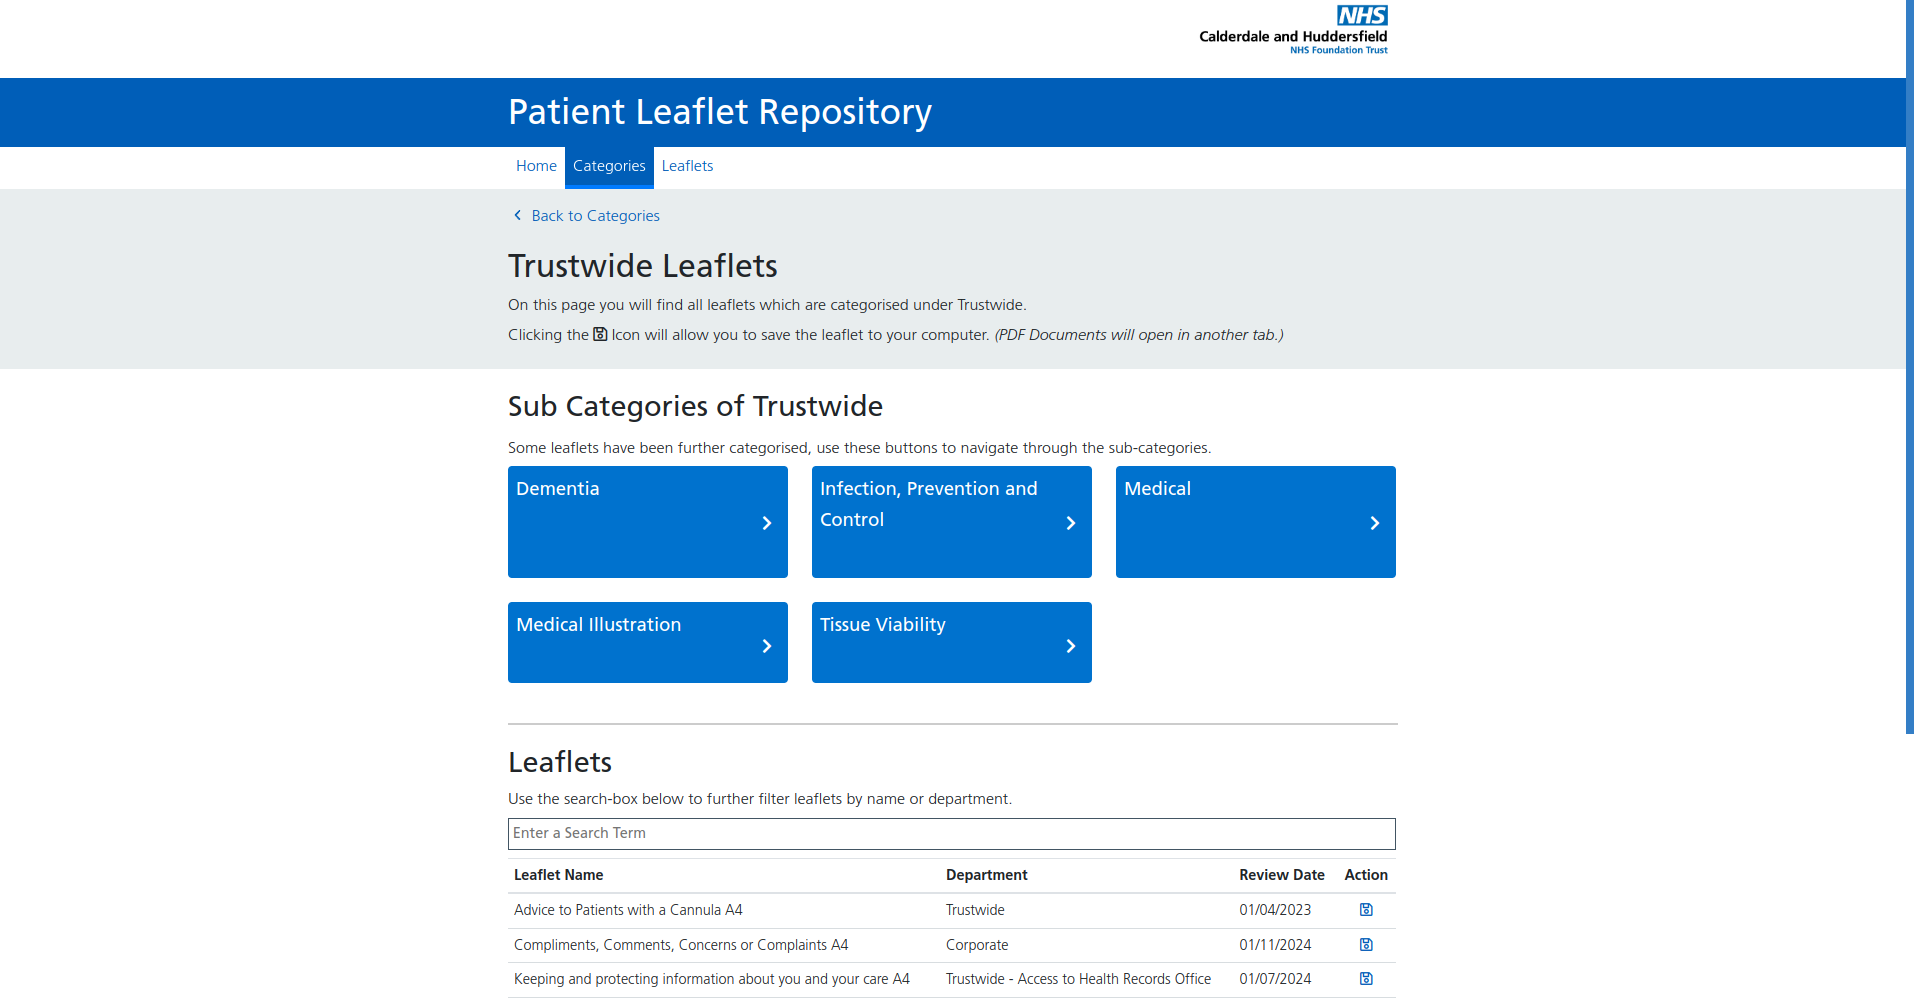 Patient leaflet repository